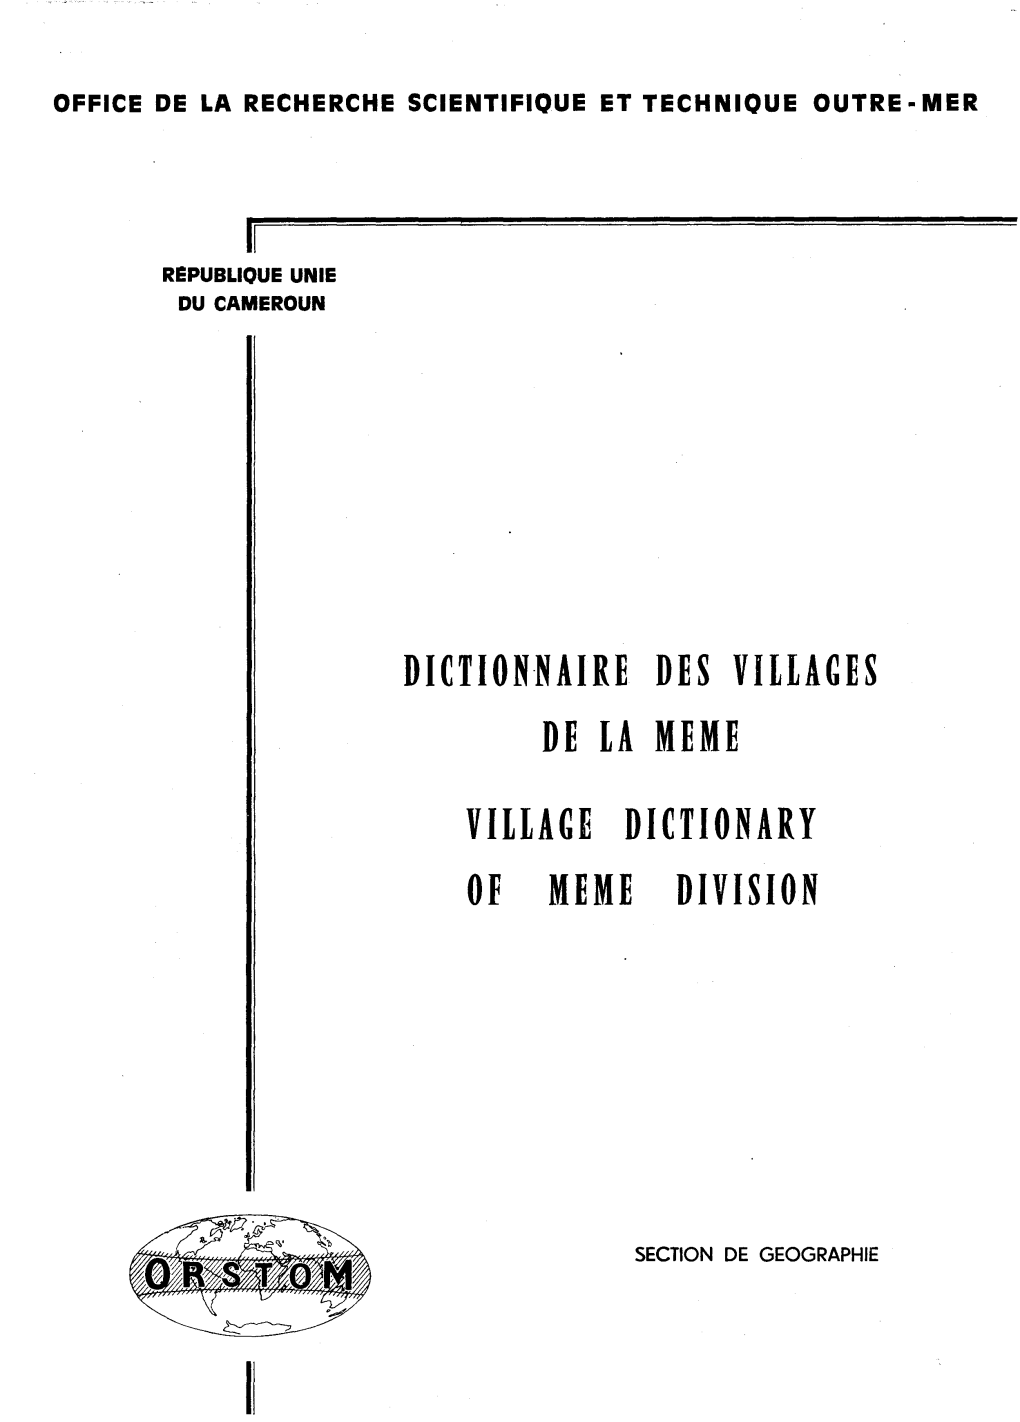 Village Dictionary of Meme Division